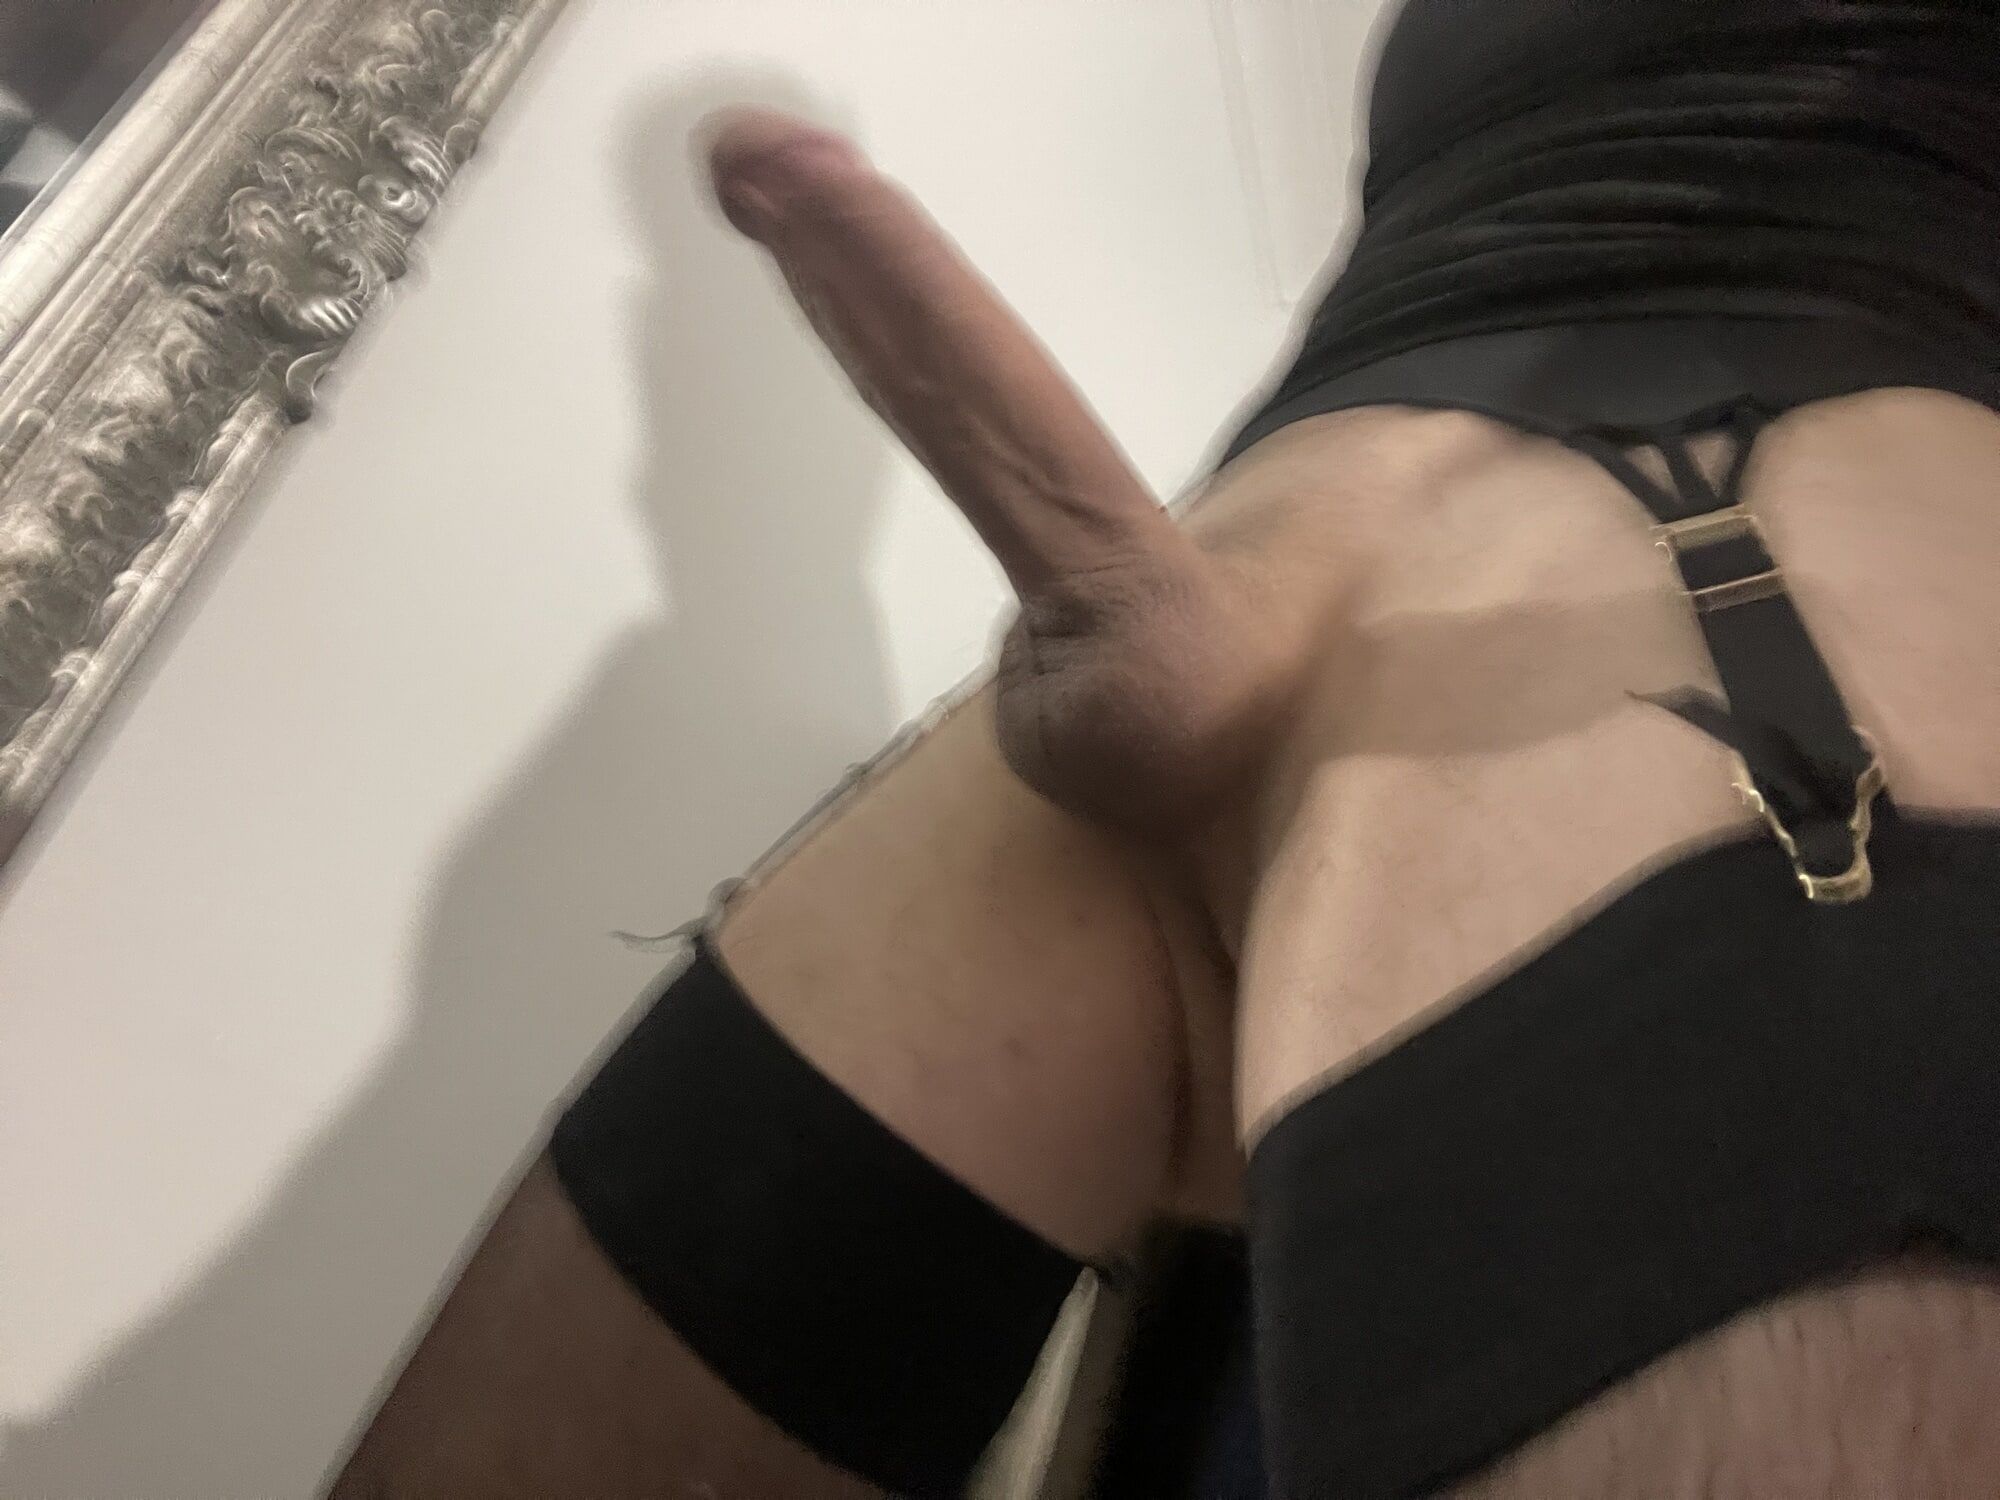 Hard cock and stockings #5